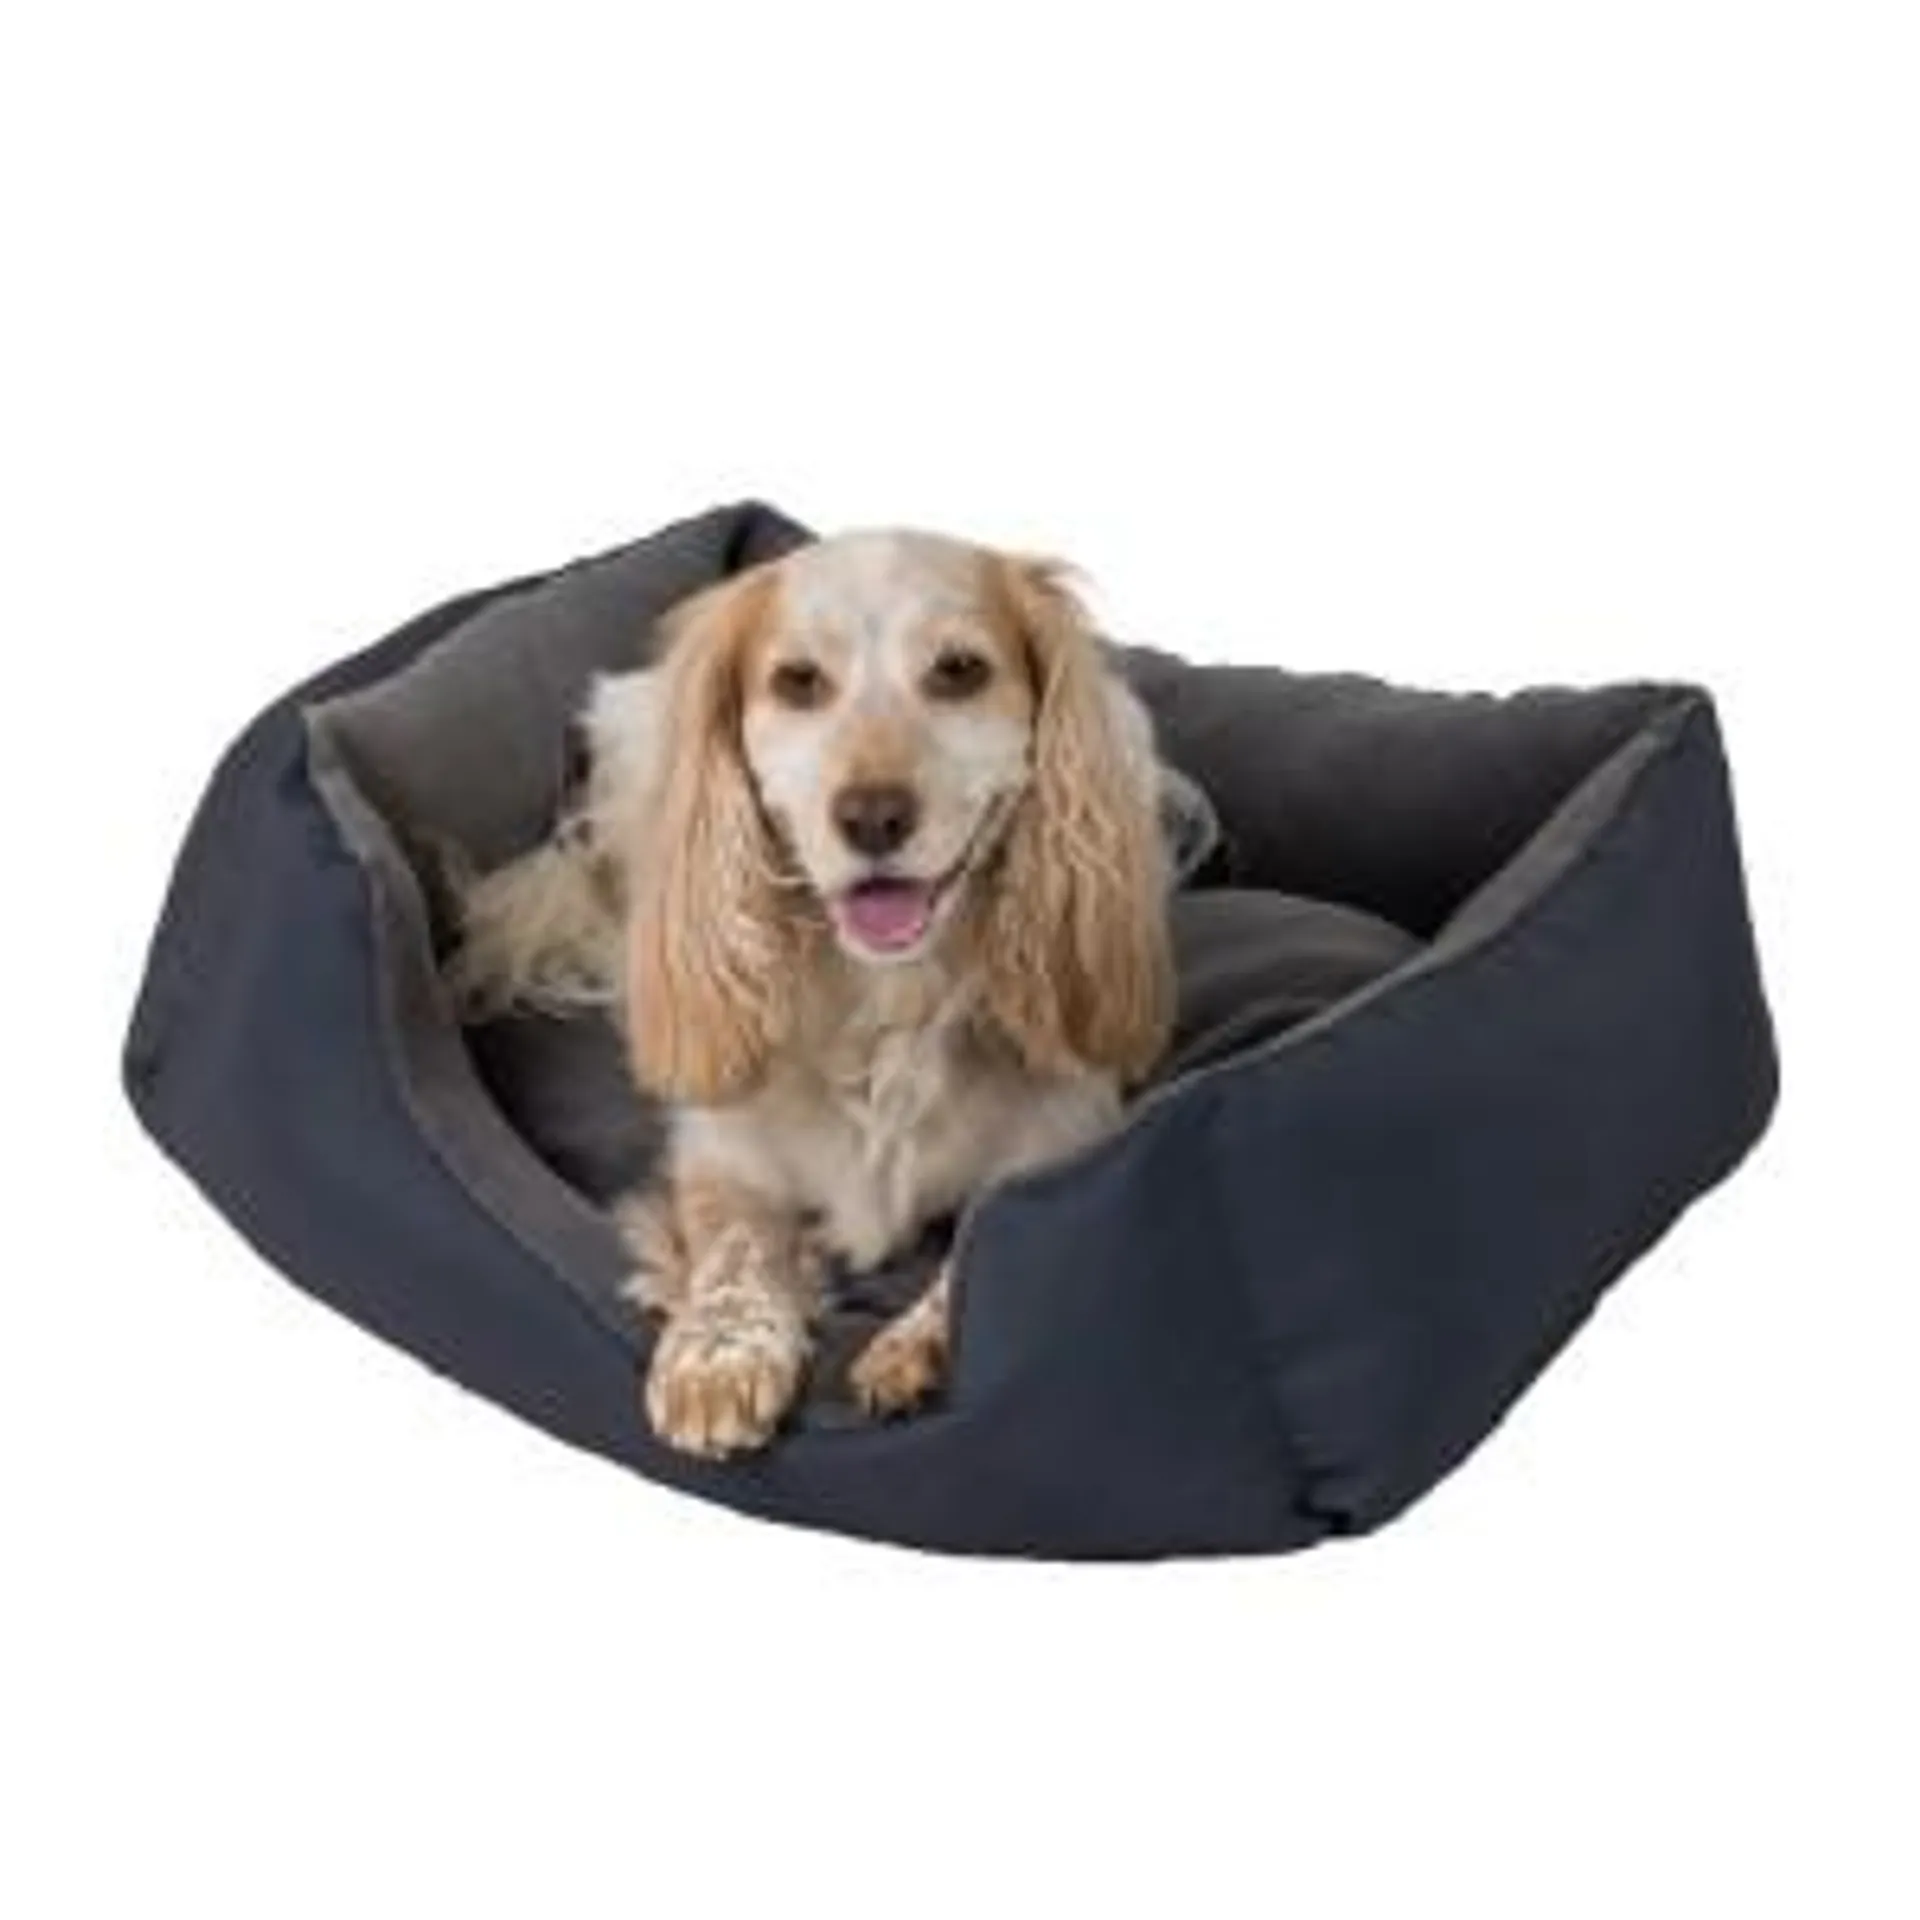 Pets at Home Fleece Square Dog Bed Charcoal Medium